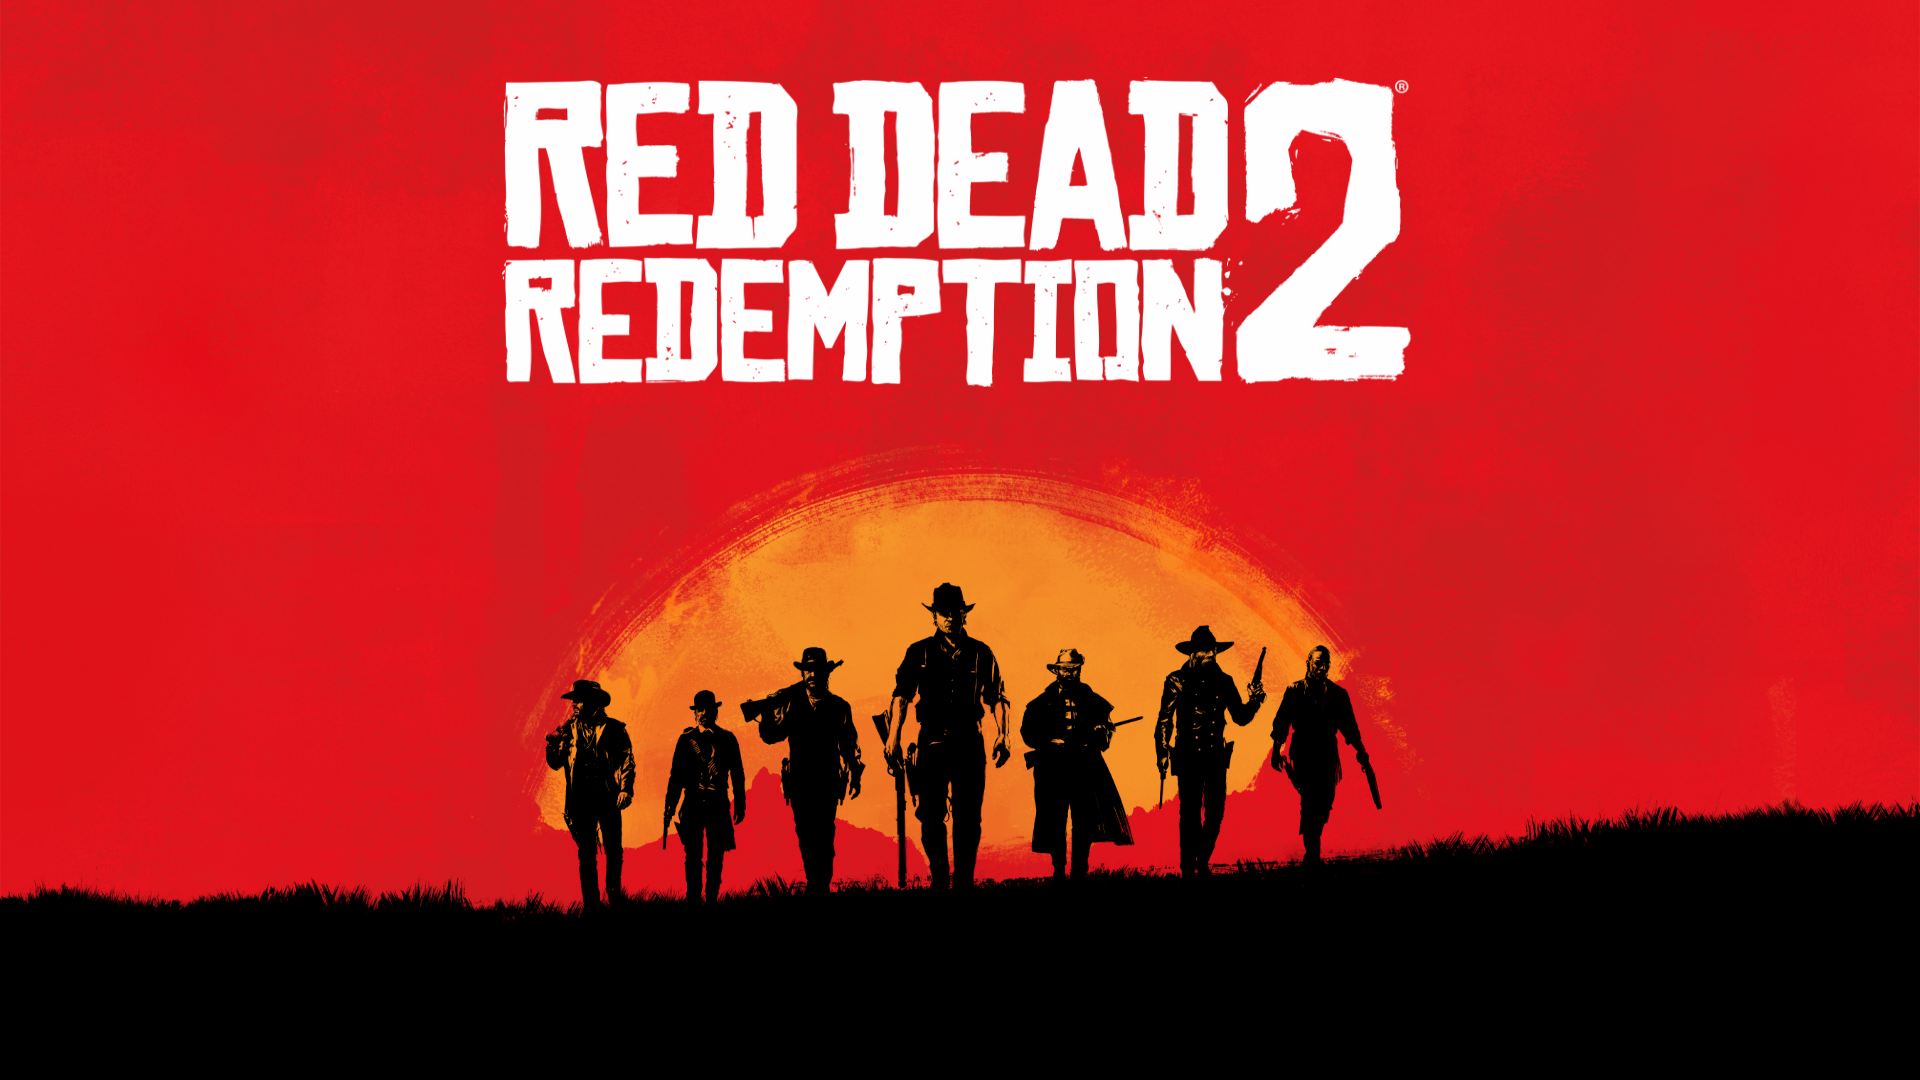 Red-Dead-Redemption-2-Background.png